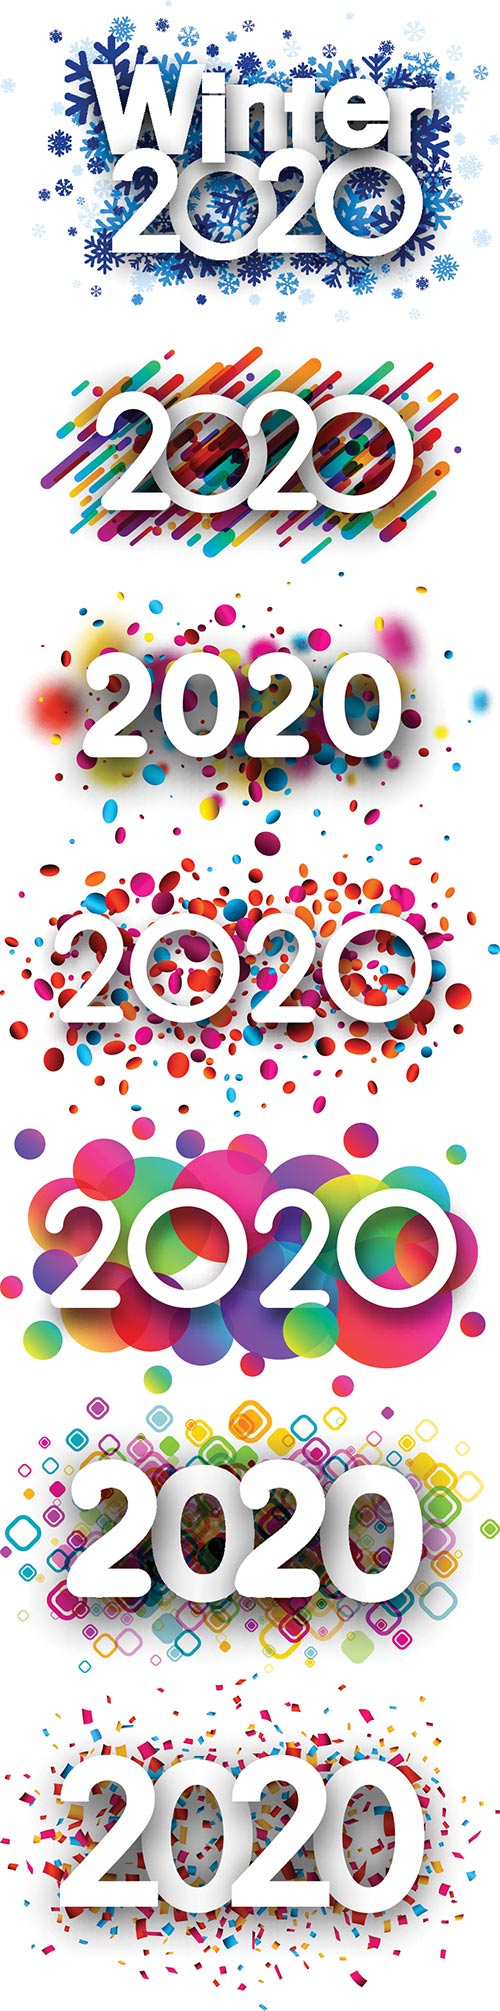 2020 new year sign with colorful round confetti on white